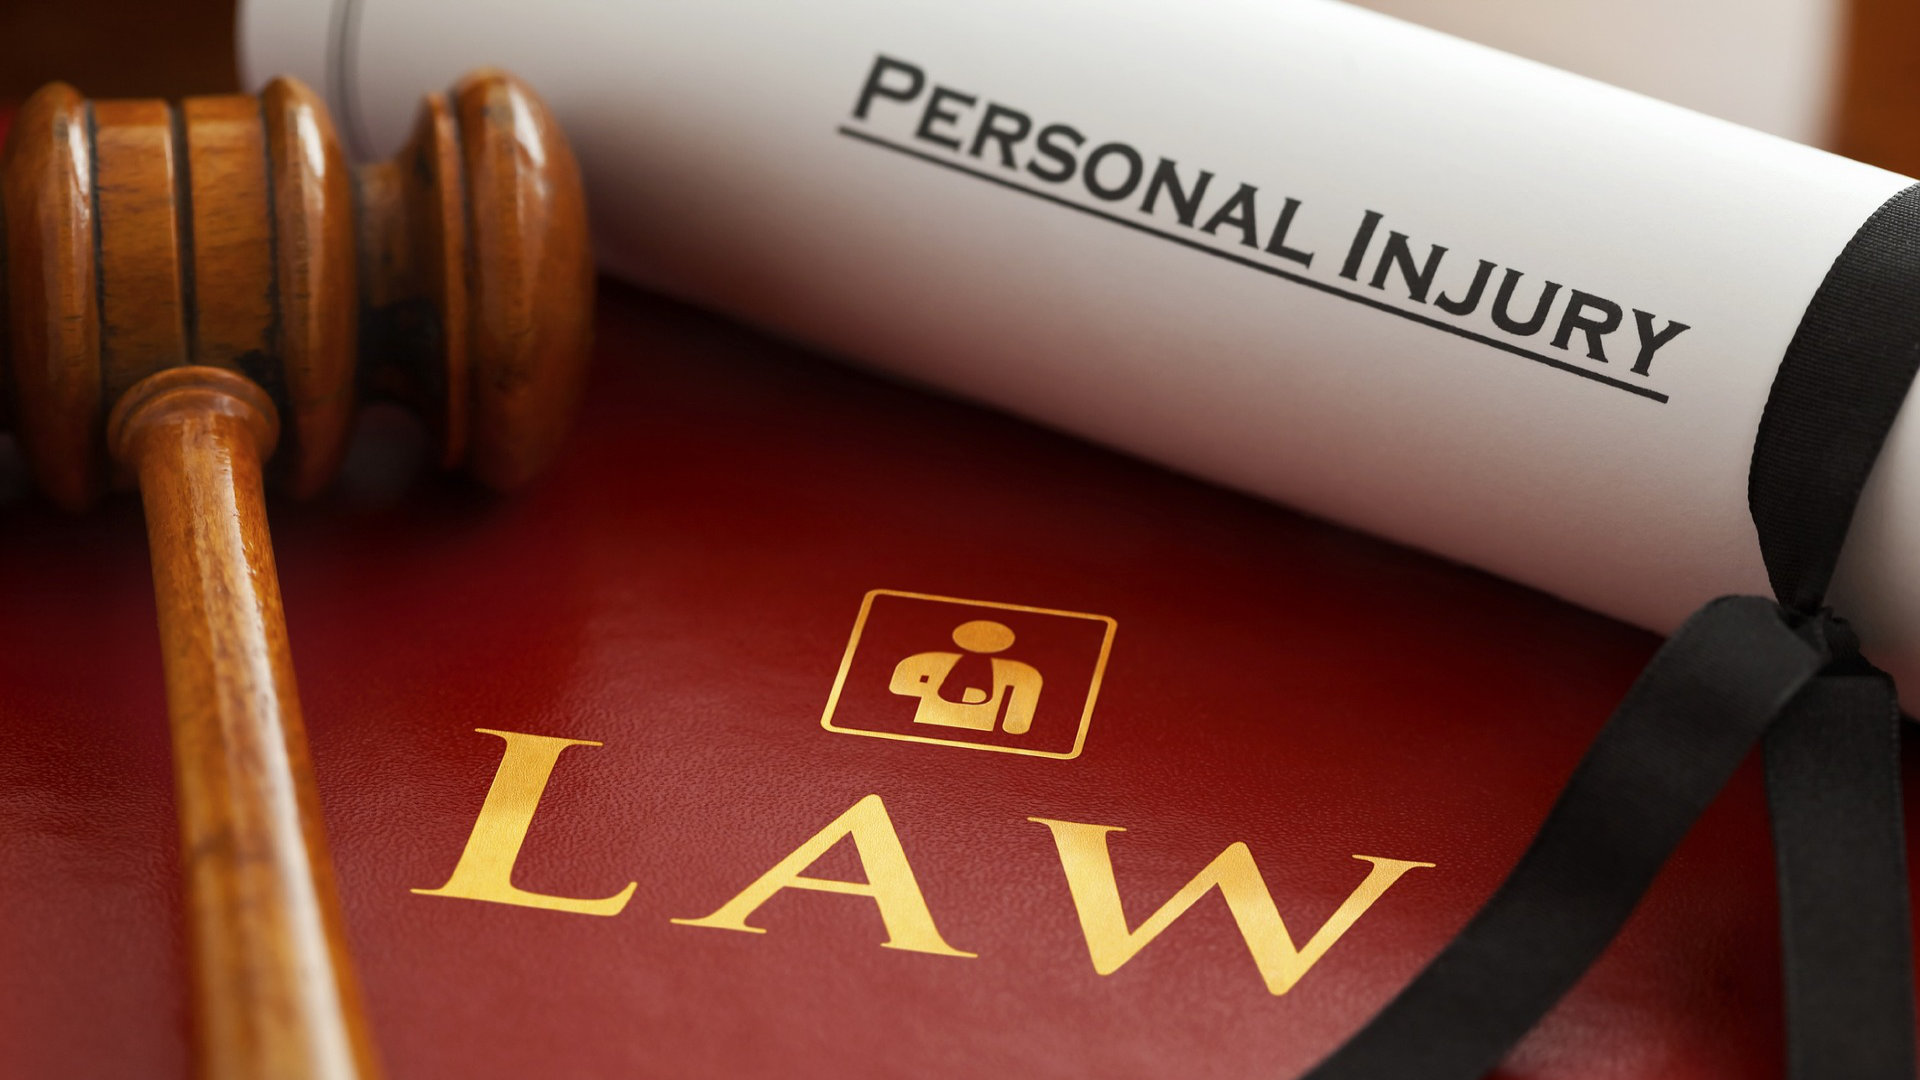 Personal Injury Lawyer Los Angeles Dedicated to Our Clients